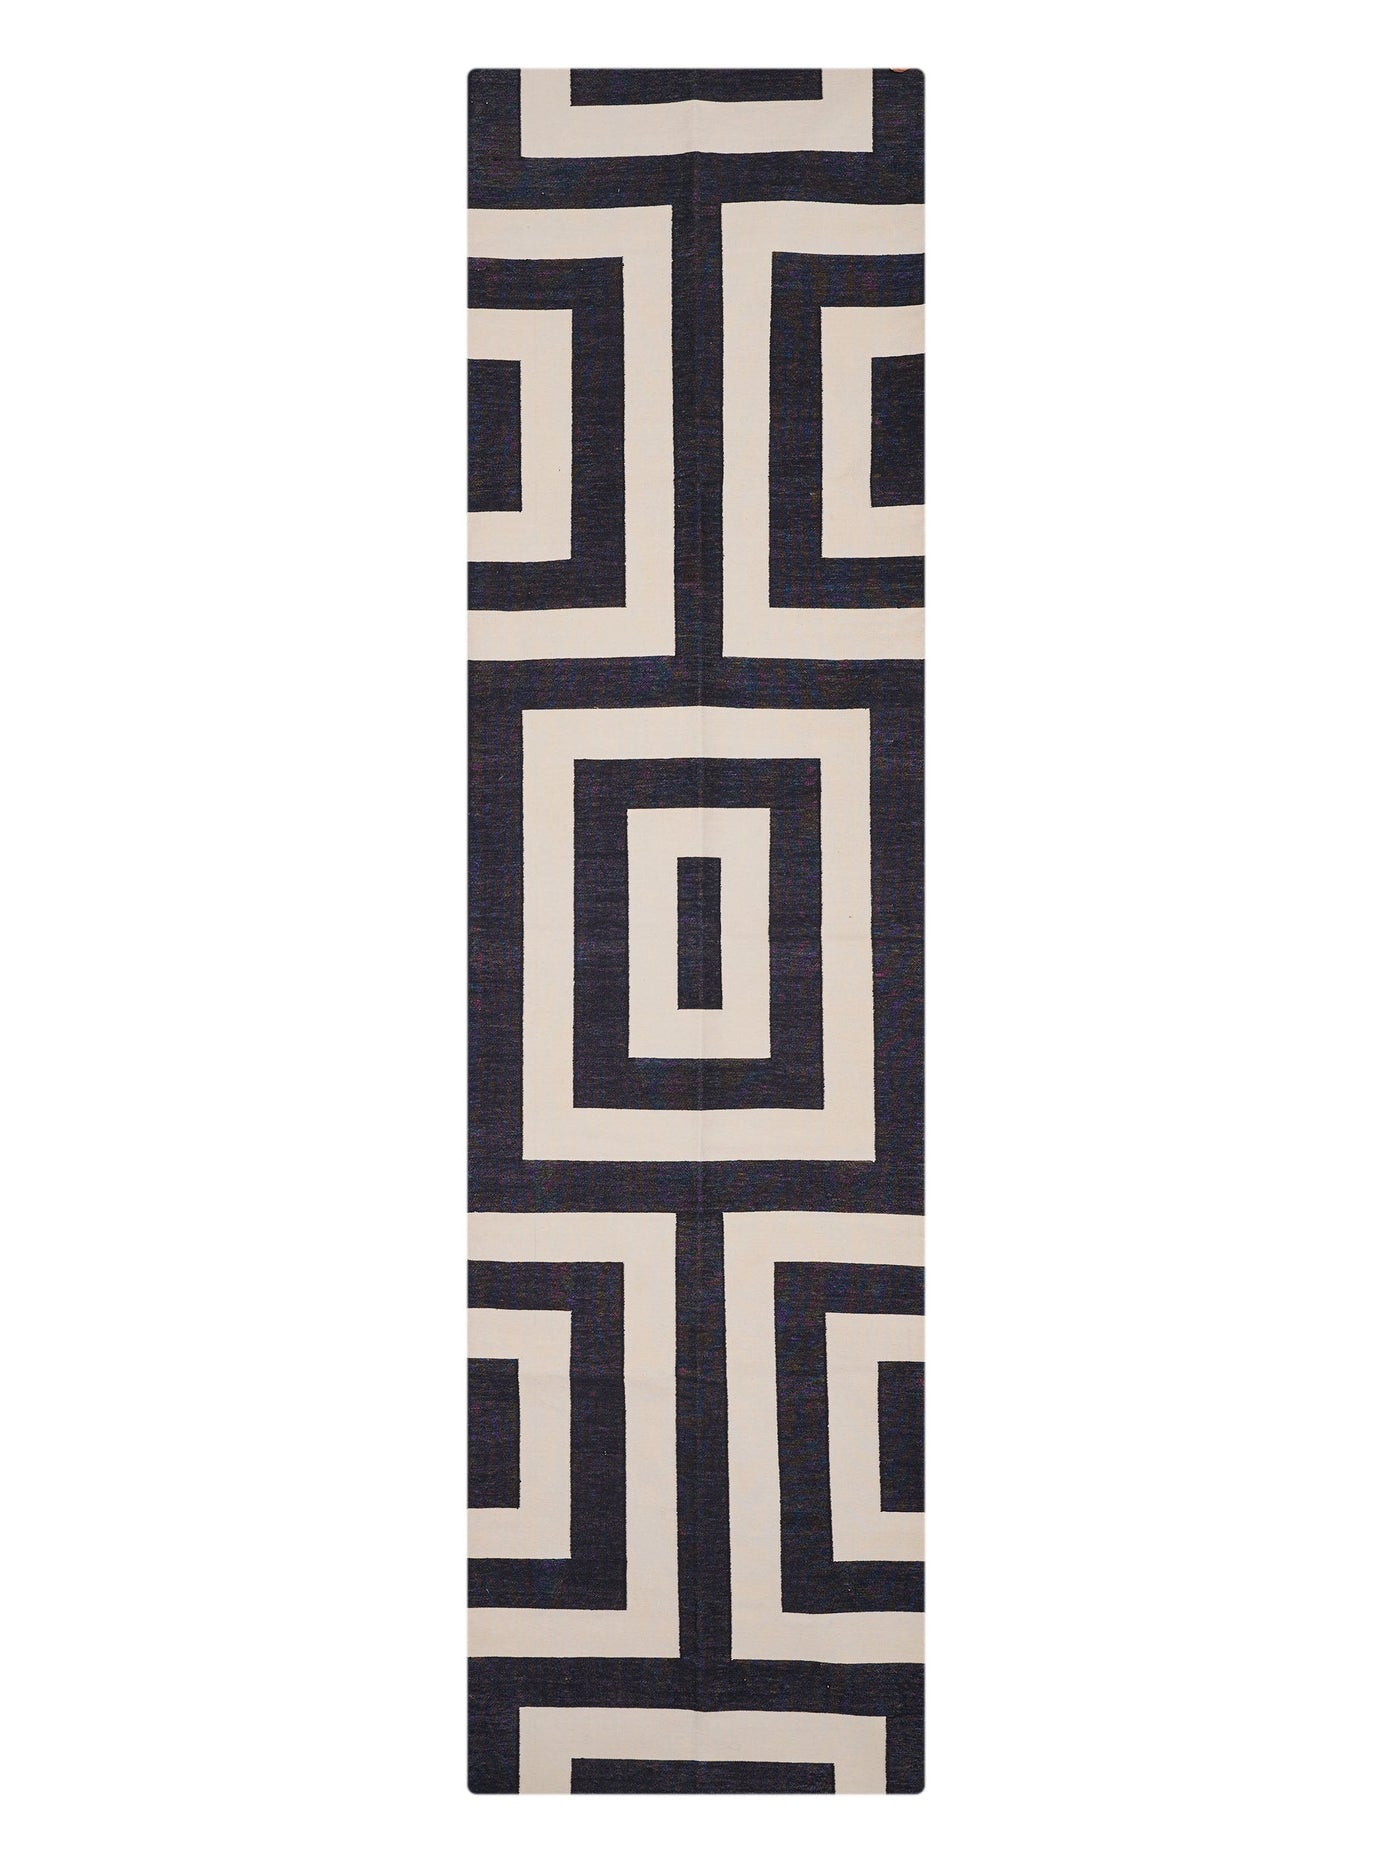 Cotton Dhurrie Bowie Runner in Black & White by Permanent Resident